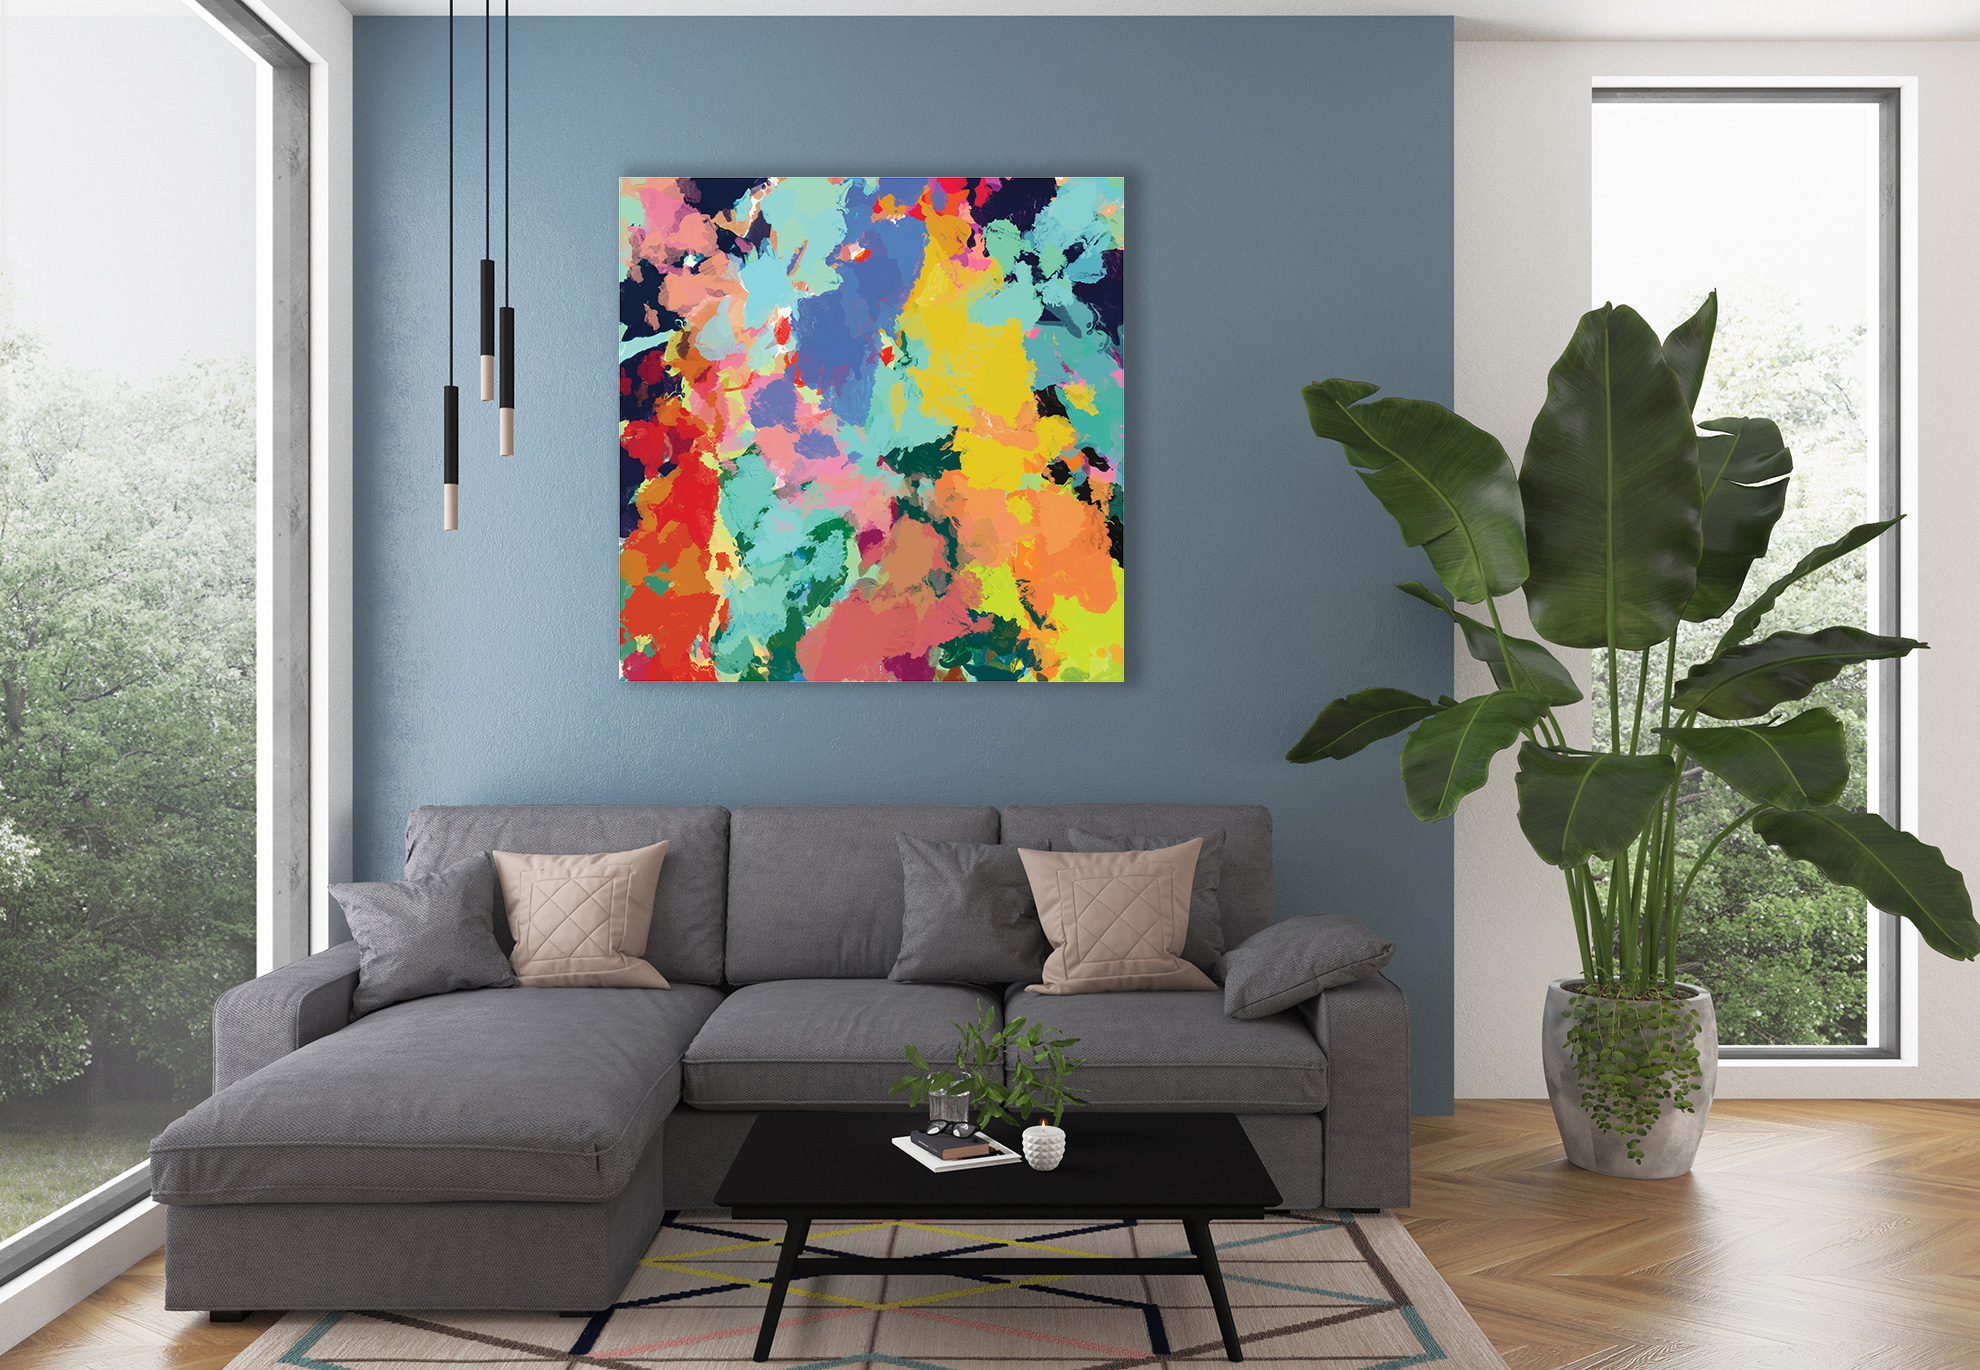 Abstracts Colors - Buy Canvas Wall Art Painting Online Dubai, UAE - e ...